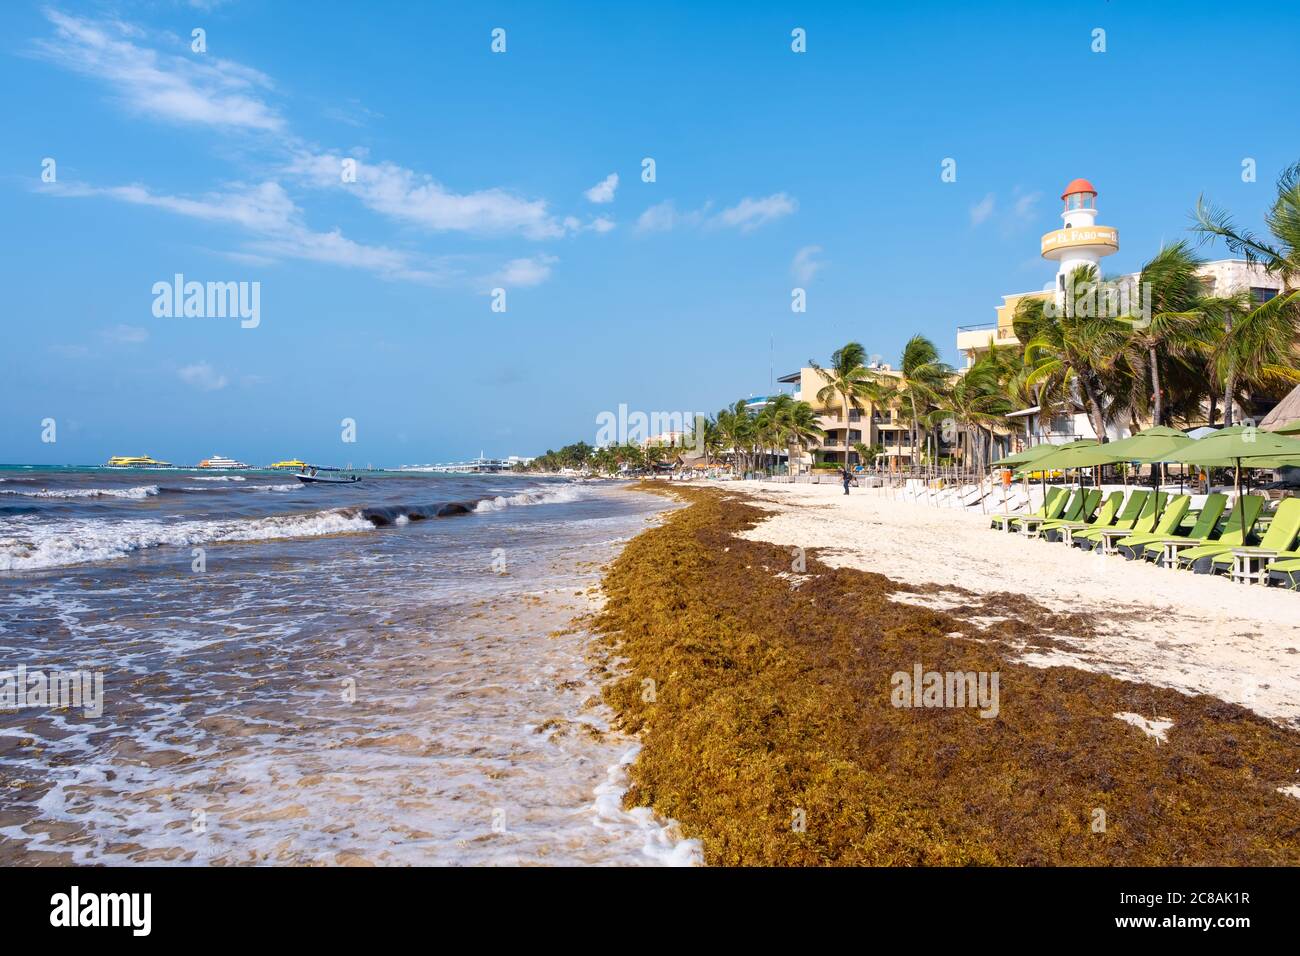 The beach at Playa del Carmen in Mexico invaded by Sargassum seaweed Stock  Photo - Alamy